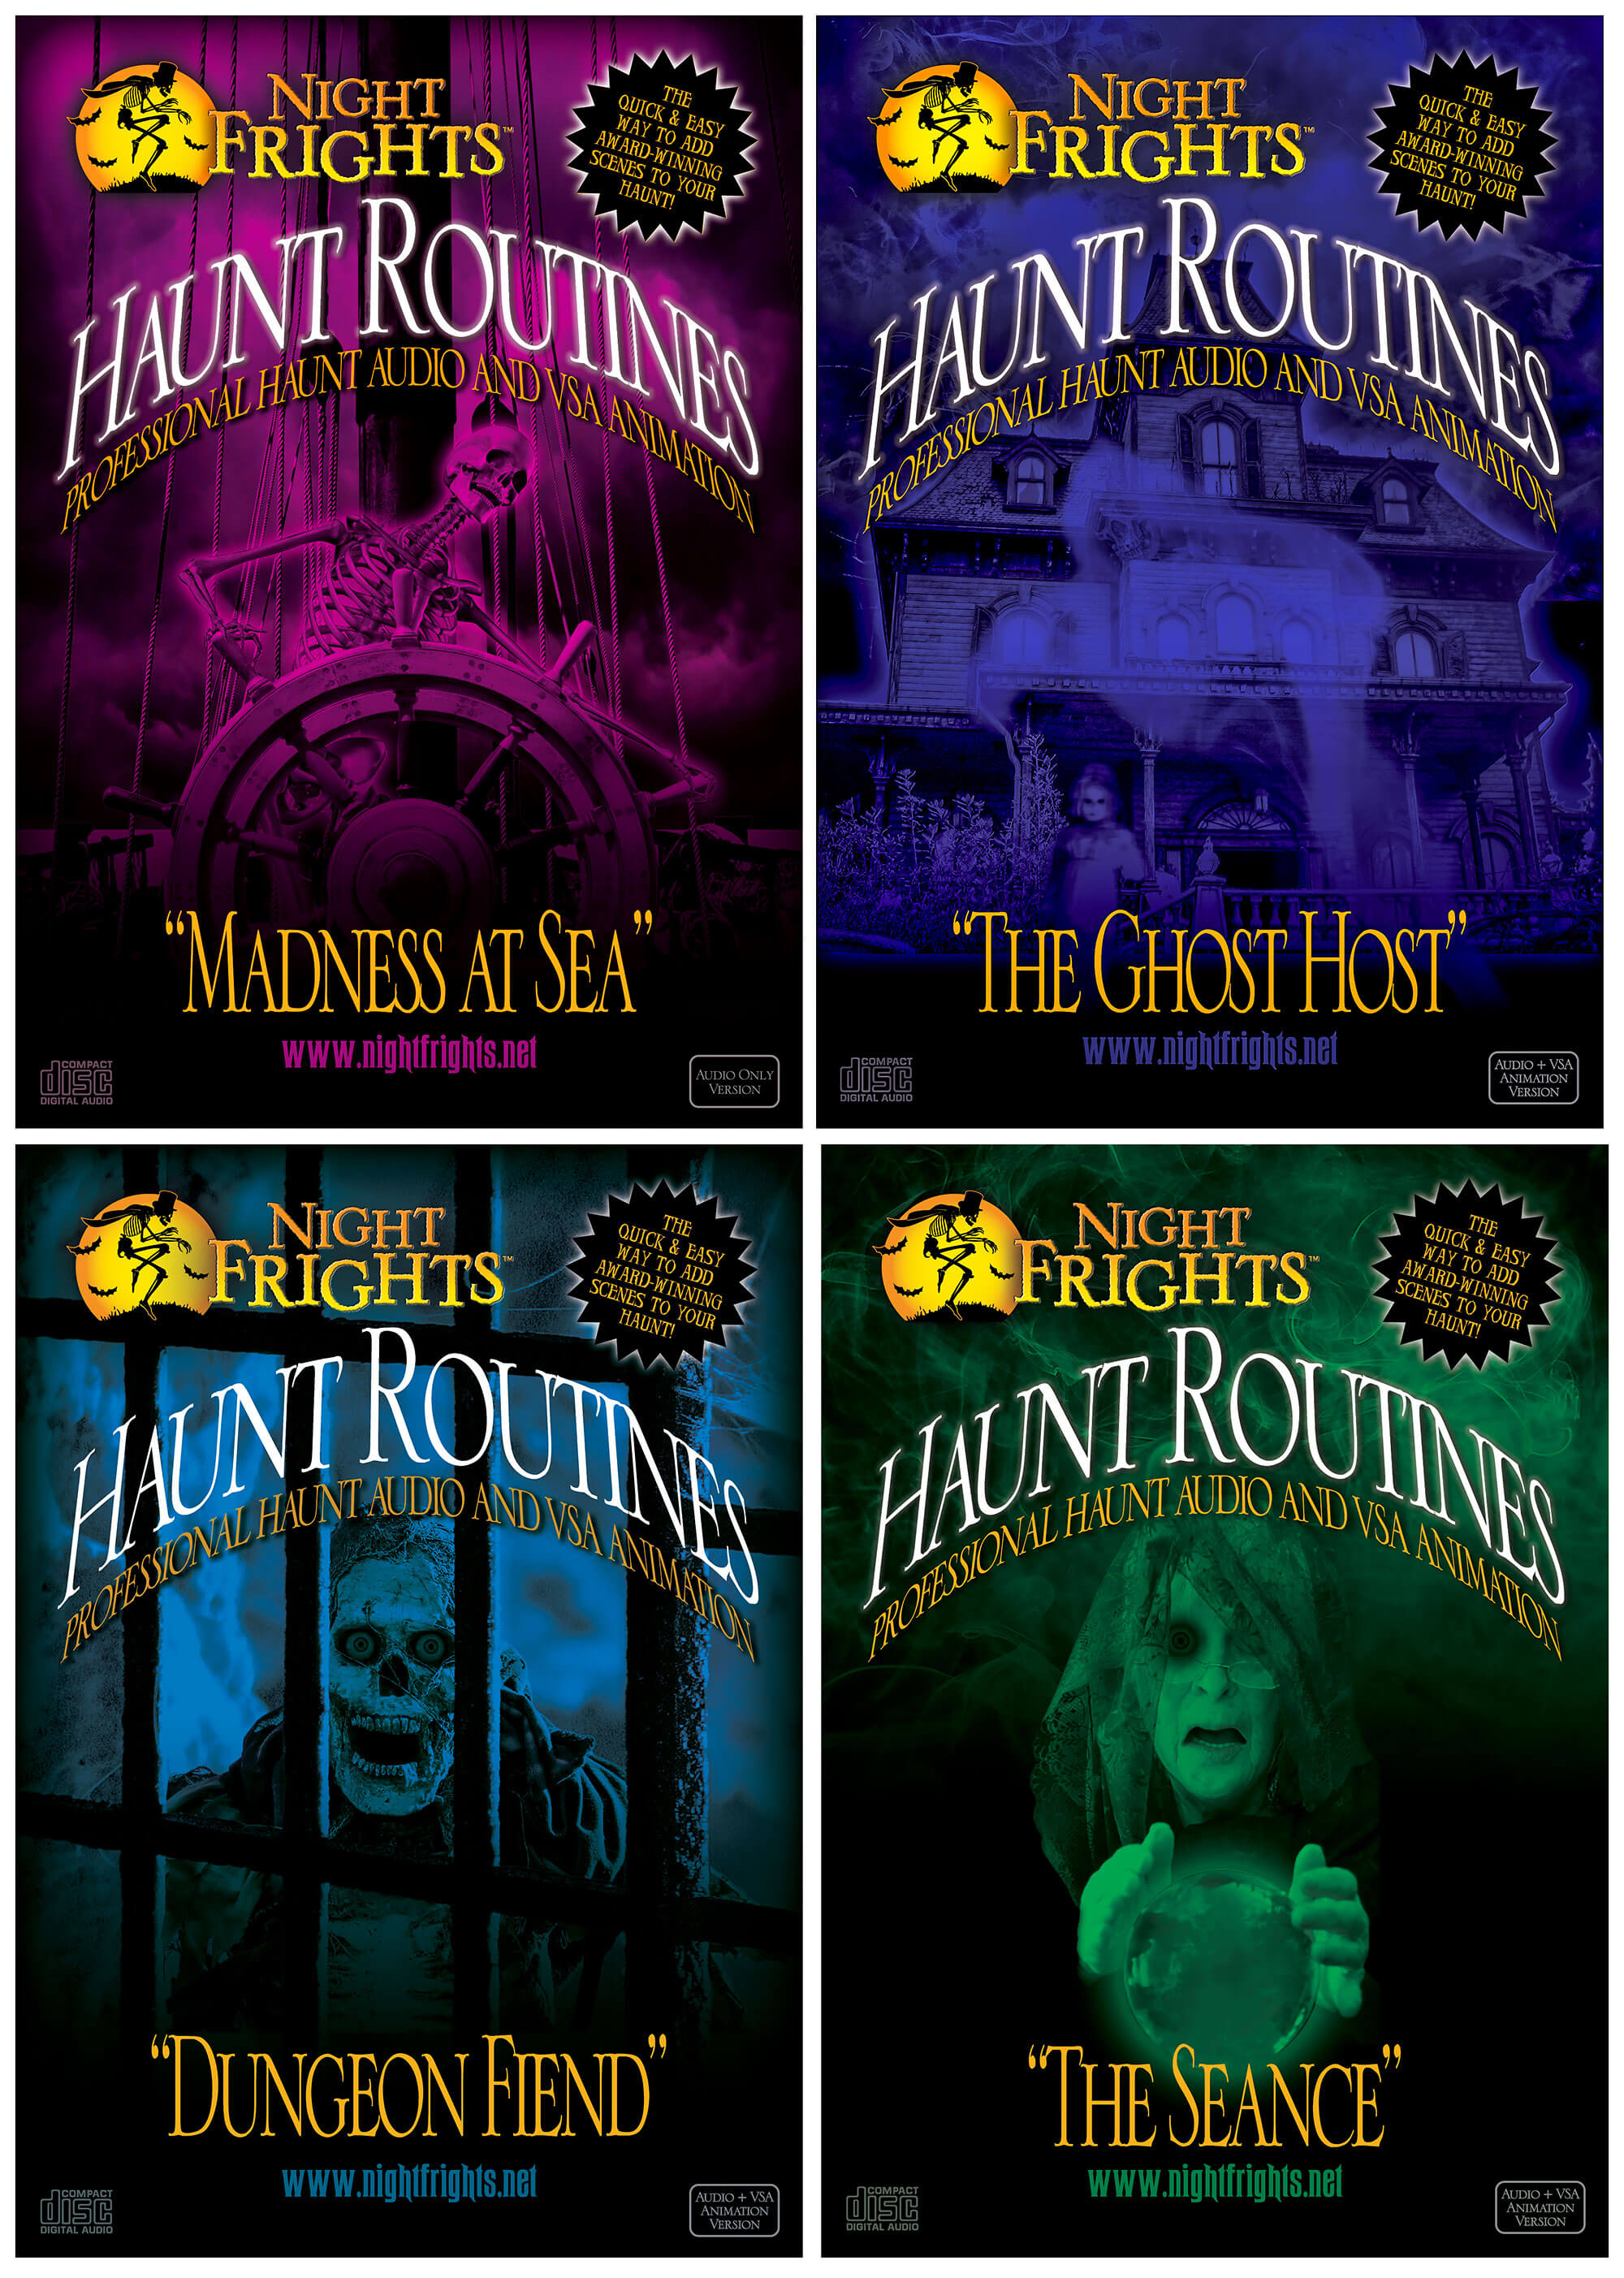 Night Frights DVD Covers